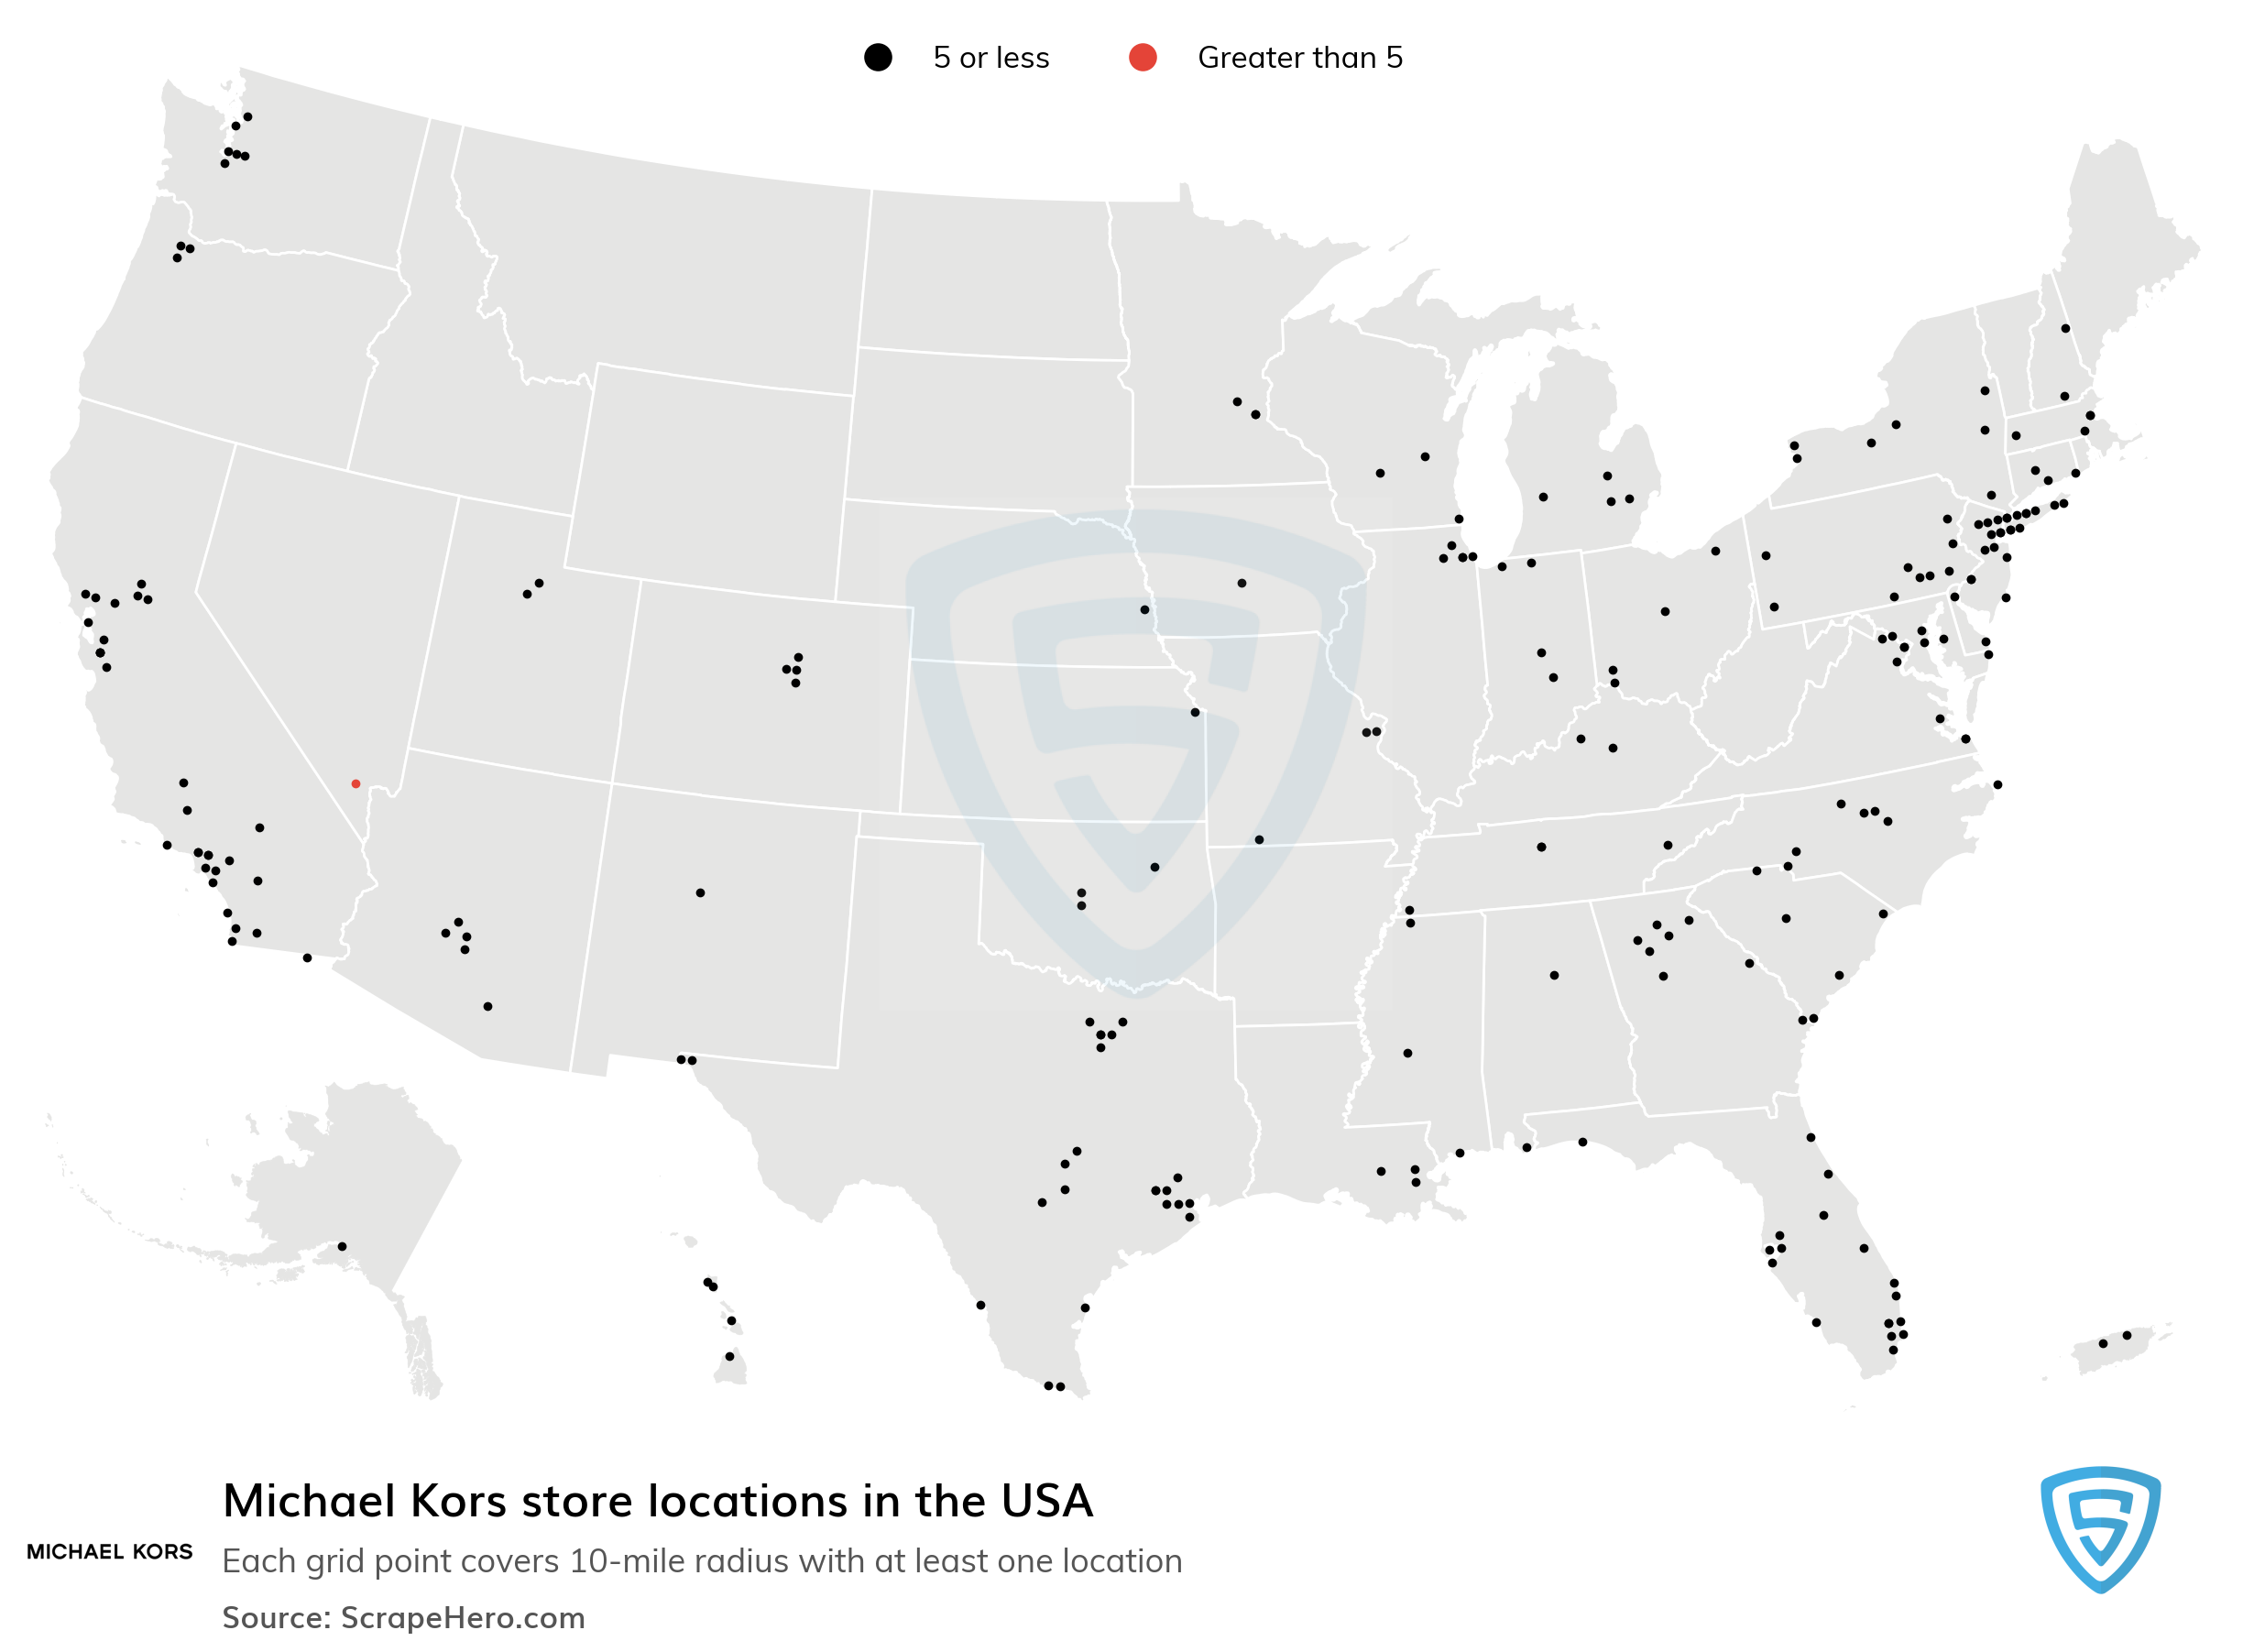 Number of Michael Kors locations in the 